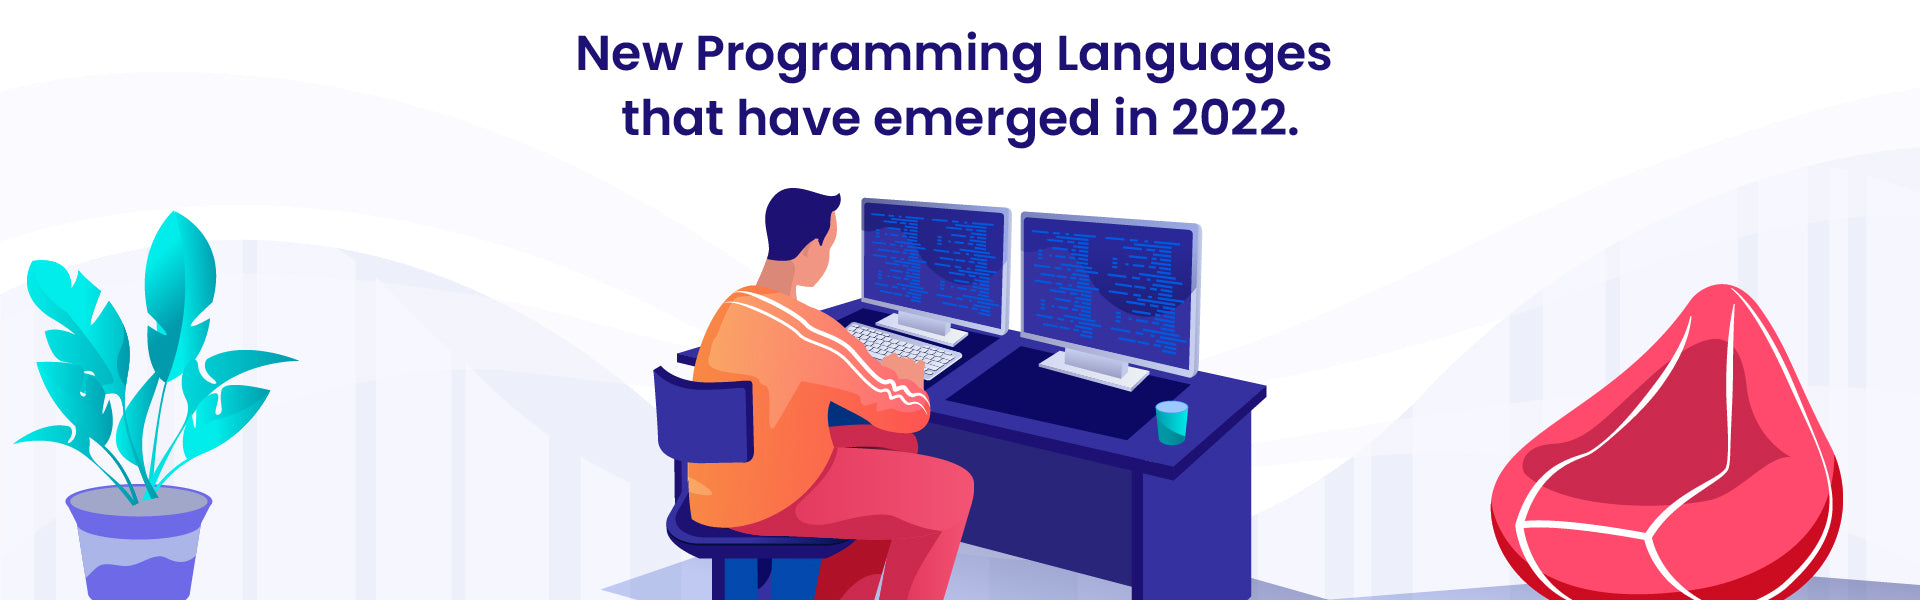 New Programming Languages that have emerged in 2022.